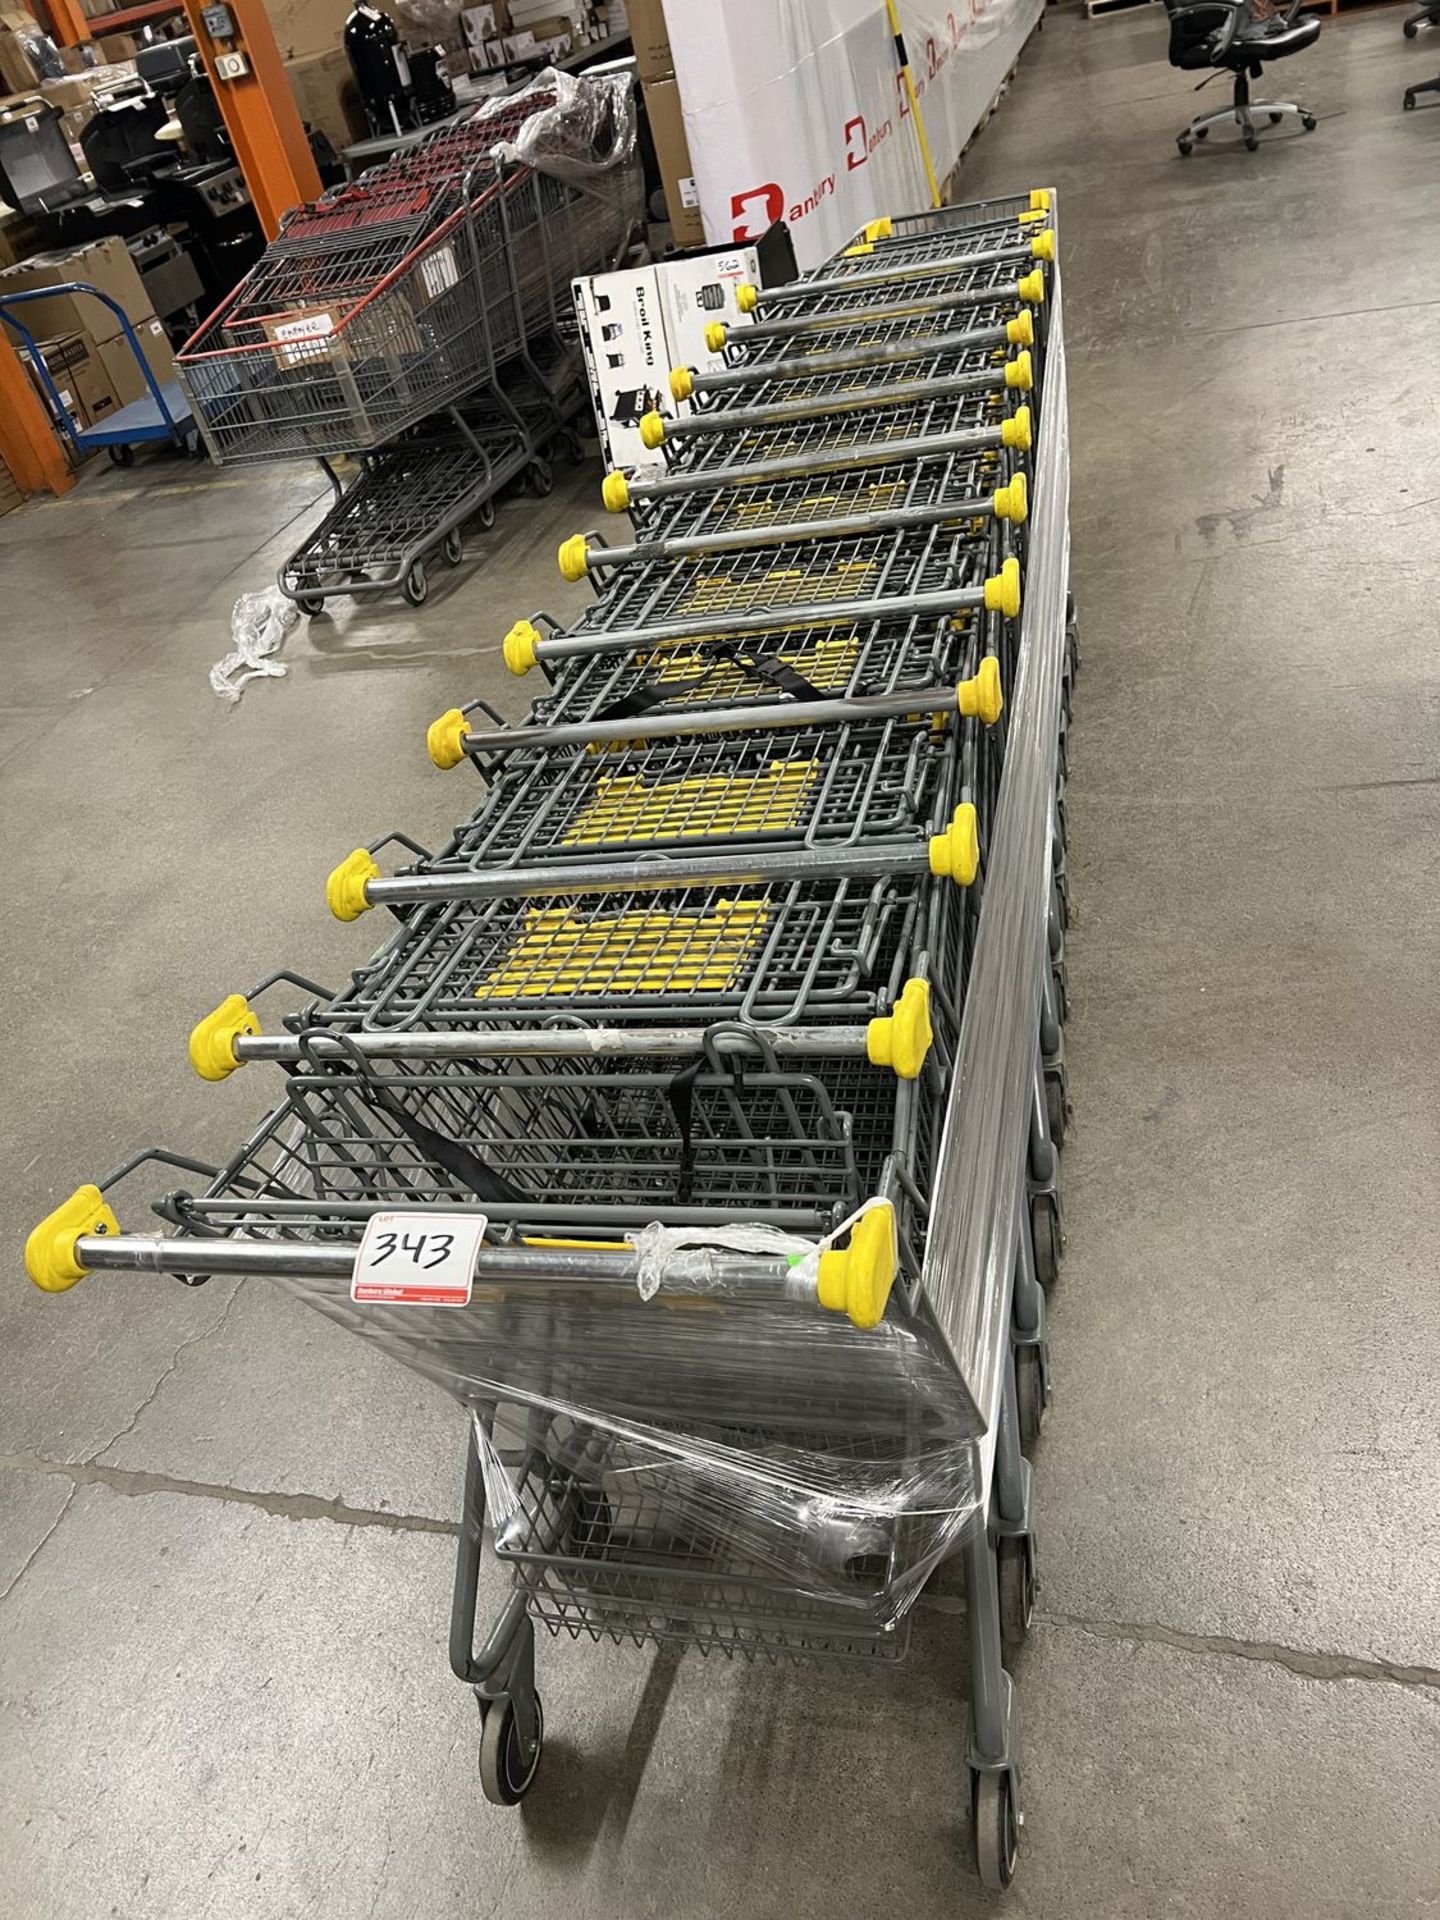 UNITS - ASSORTED SHOPPING CARTS